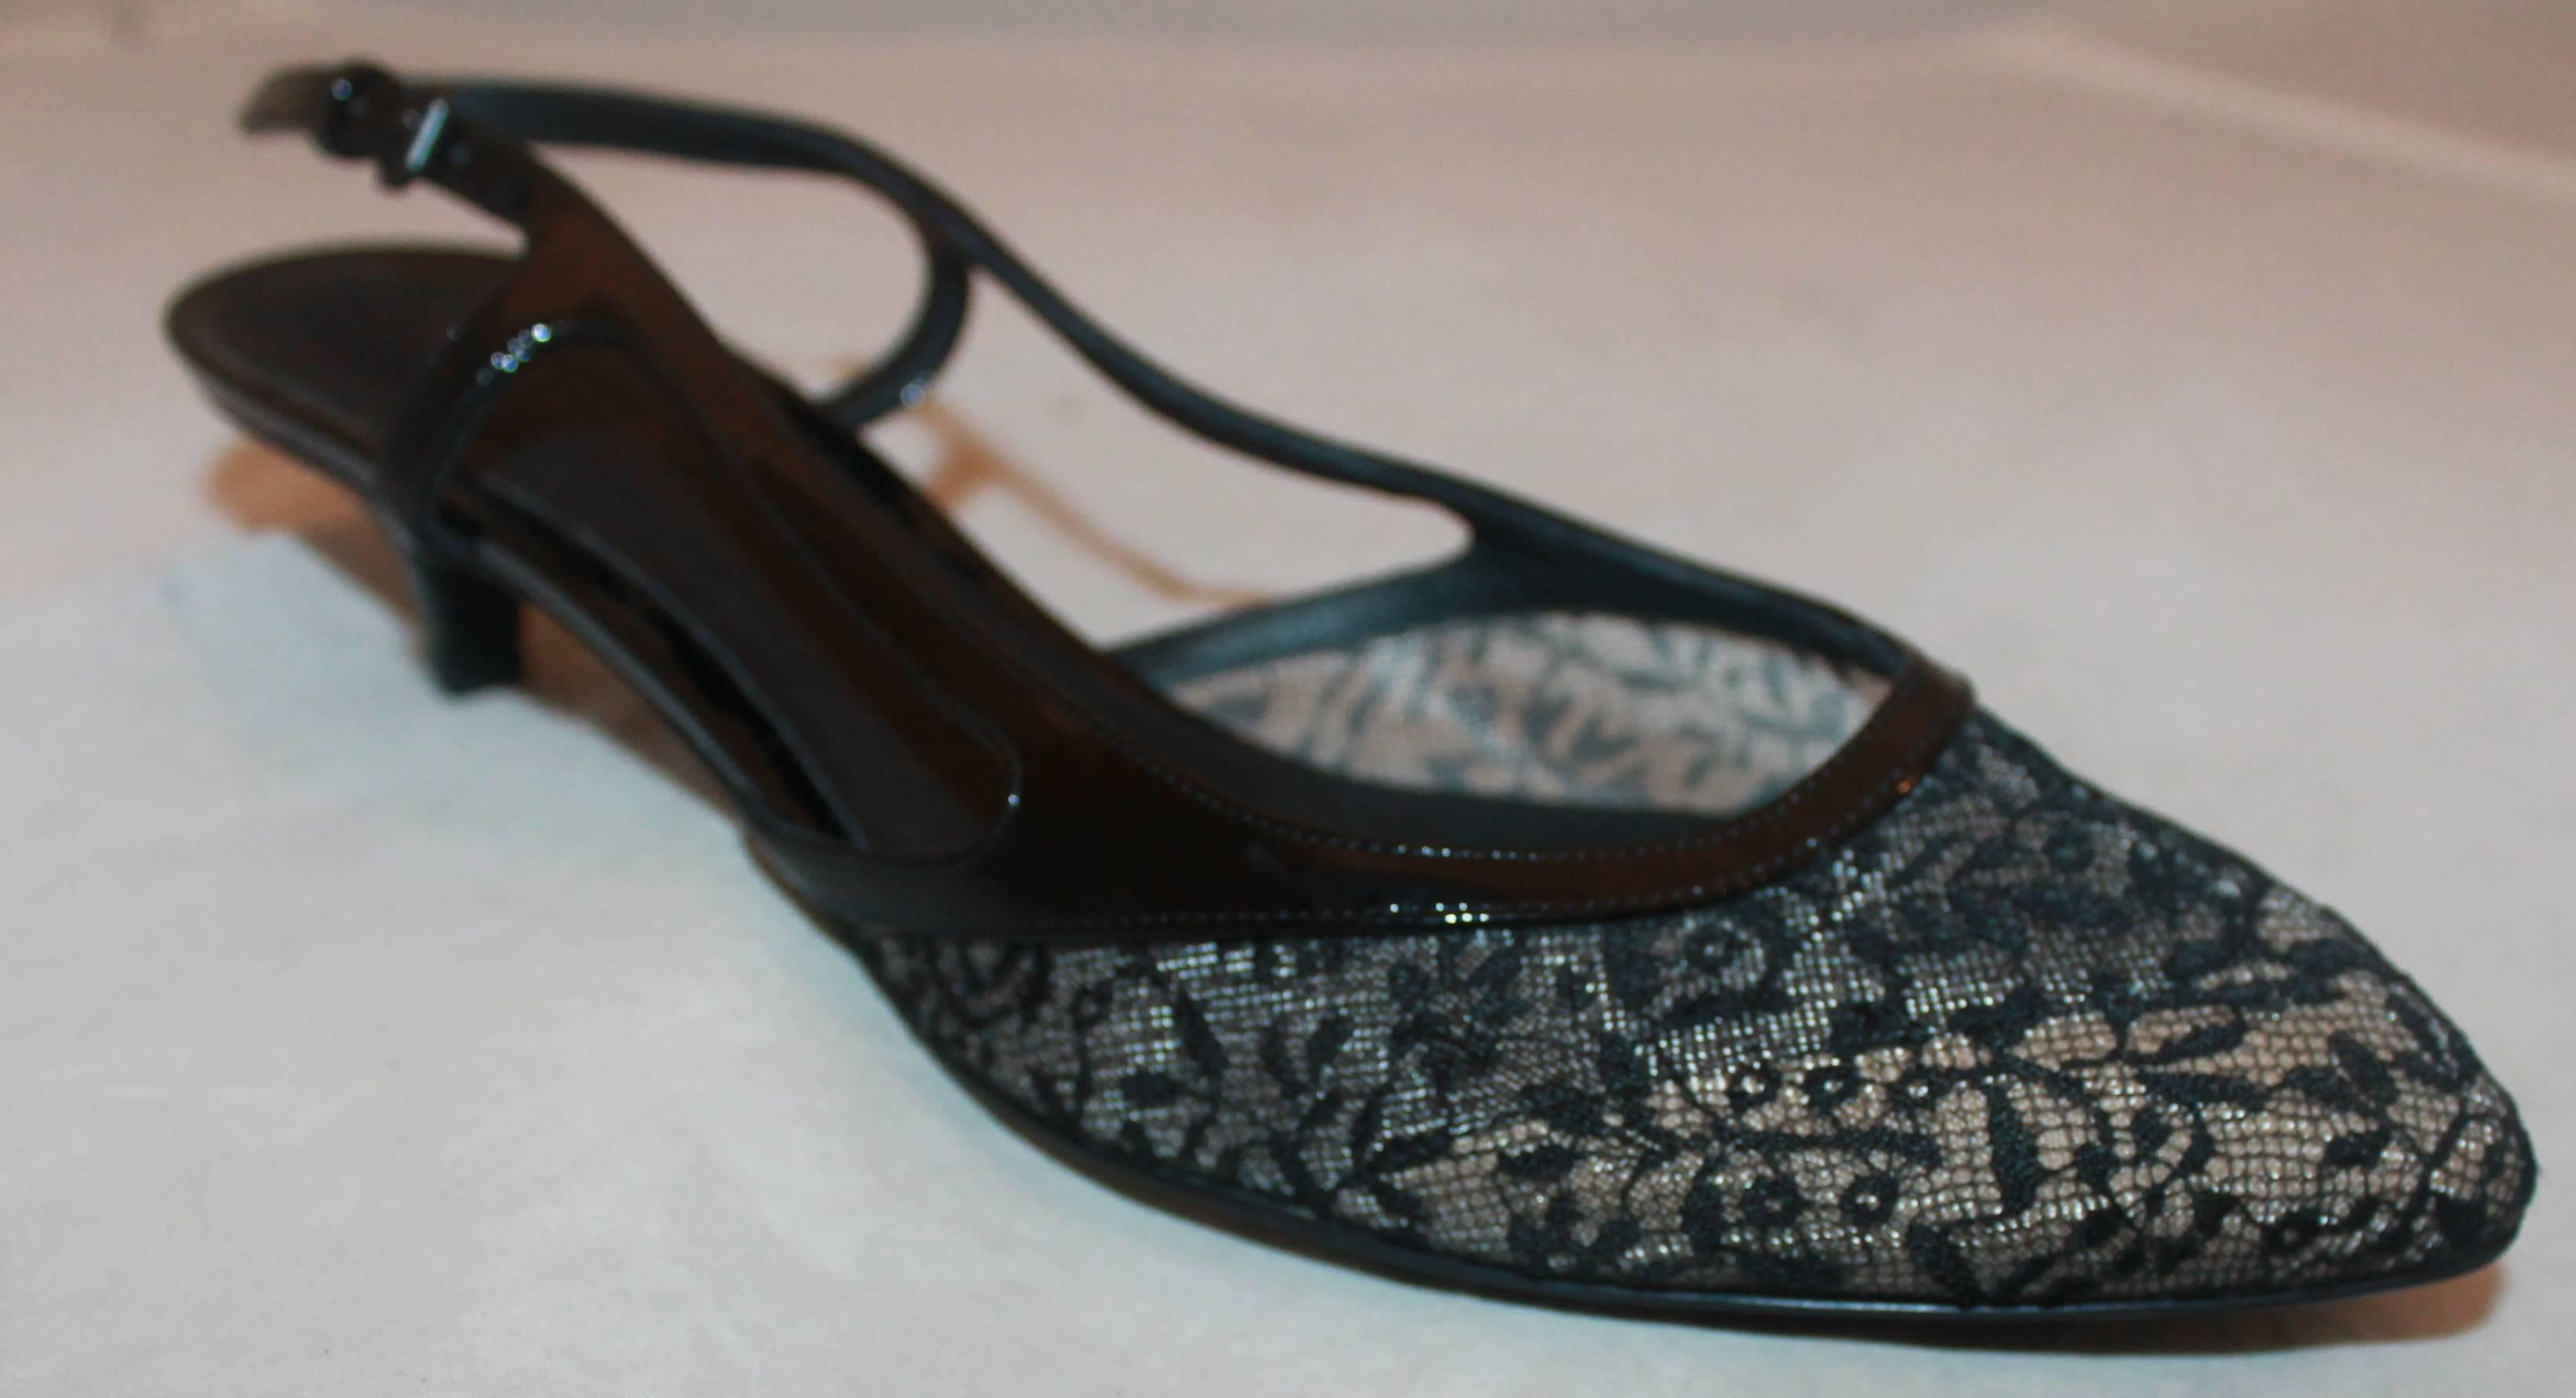 Bottega Veneta Black Patent & Lace Slingbacks w/ Kitten Heel - 41.  These slingbacks are in very good condition with some wear to the sole consistent with their use.  They feature an elegant black lace, black patent trim and straps, a beige underlay